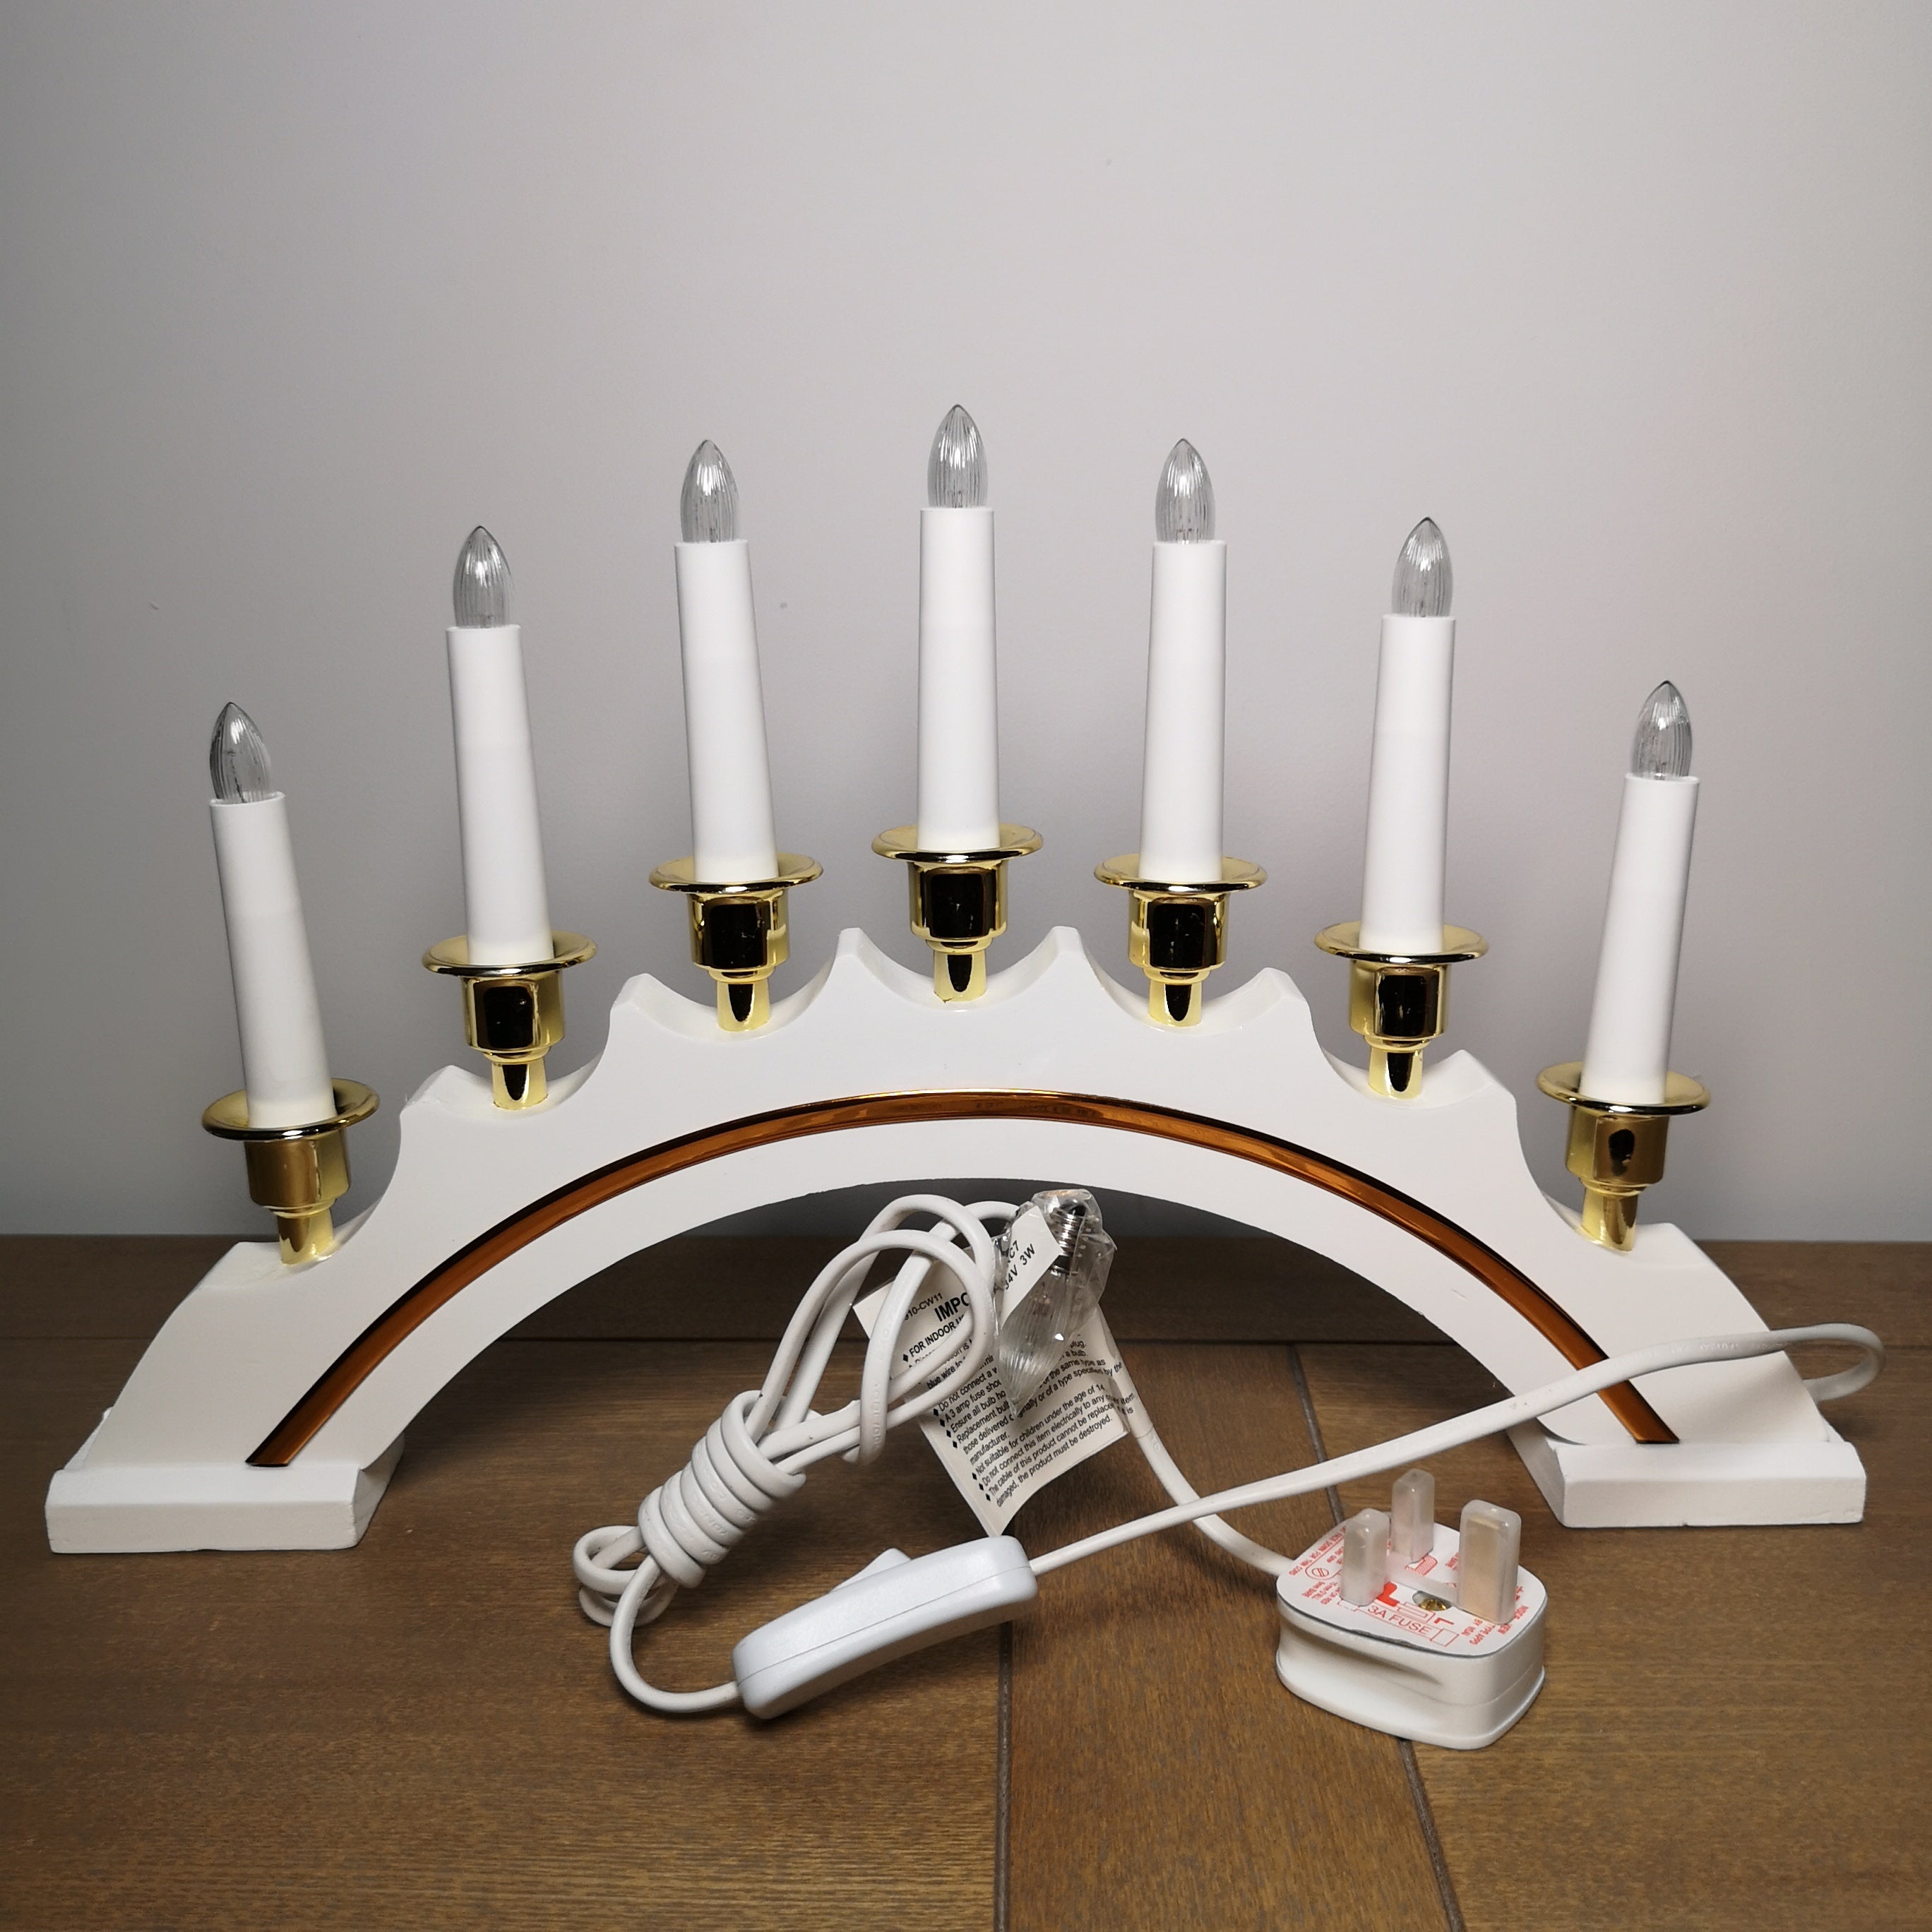 45cm Premier Christmas Candlebridge with 7 Bulbs in White Mains Powered